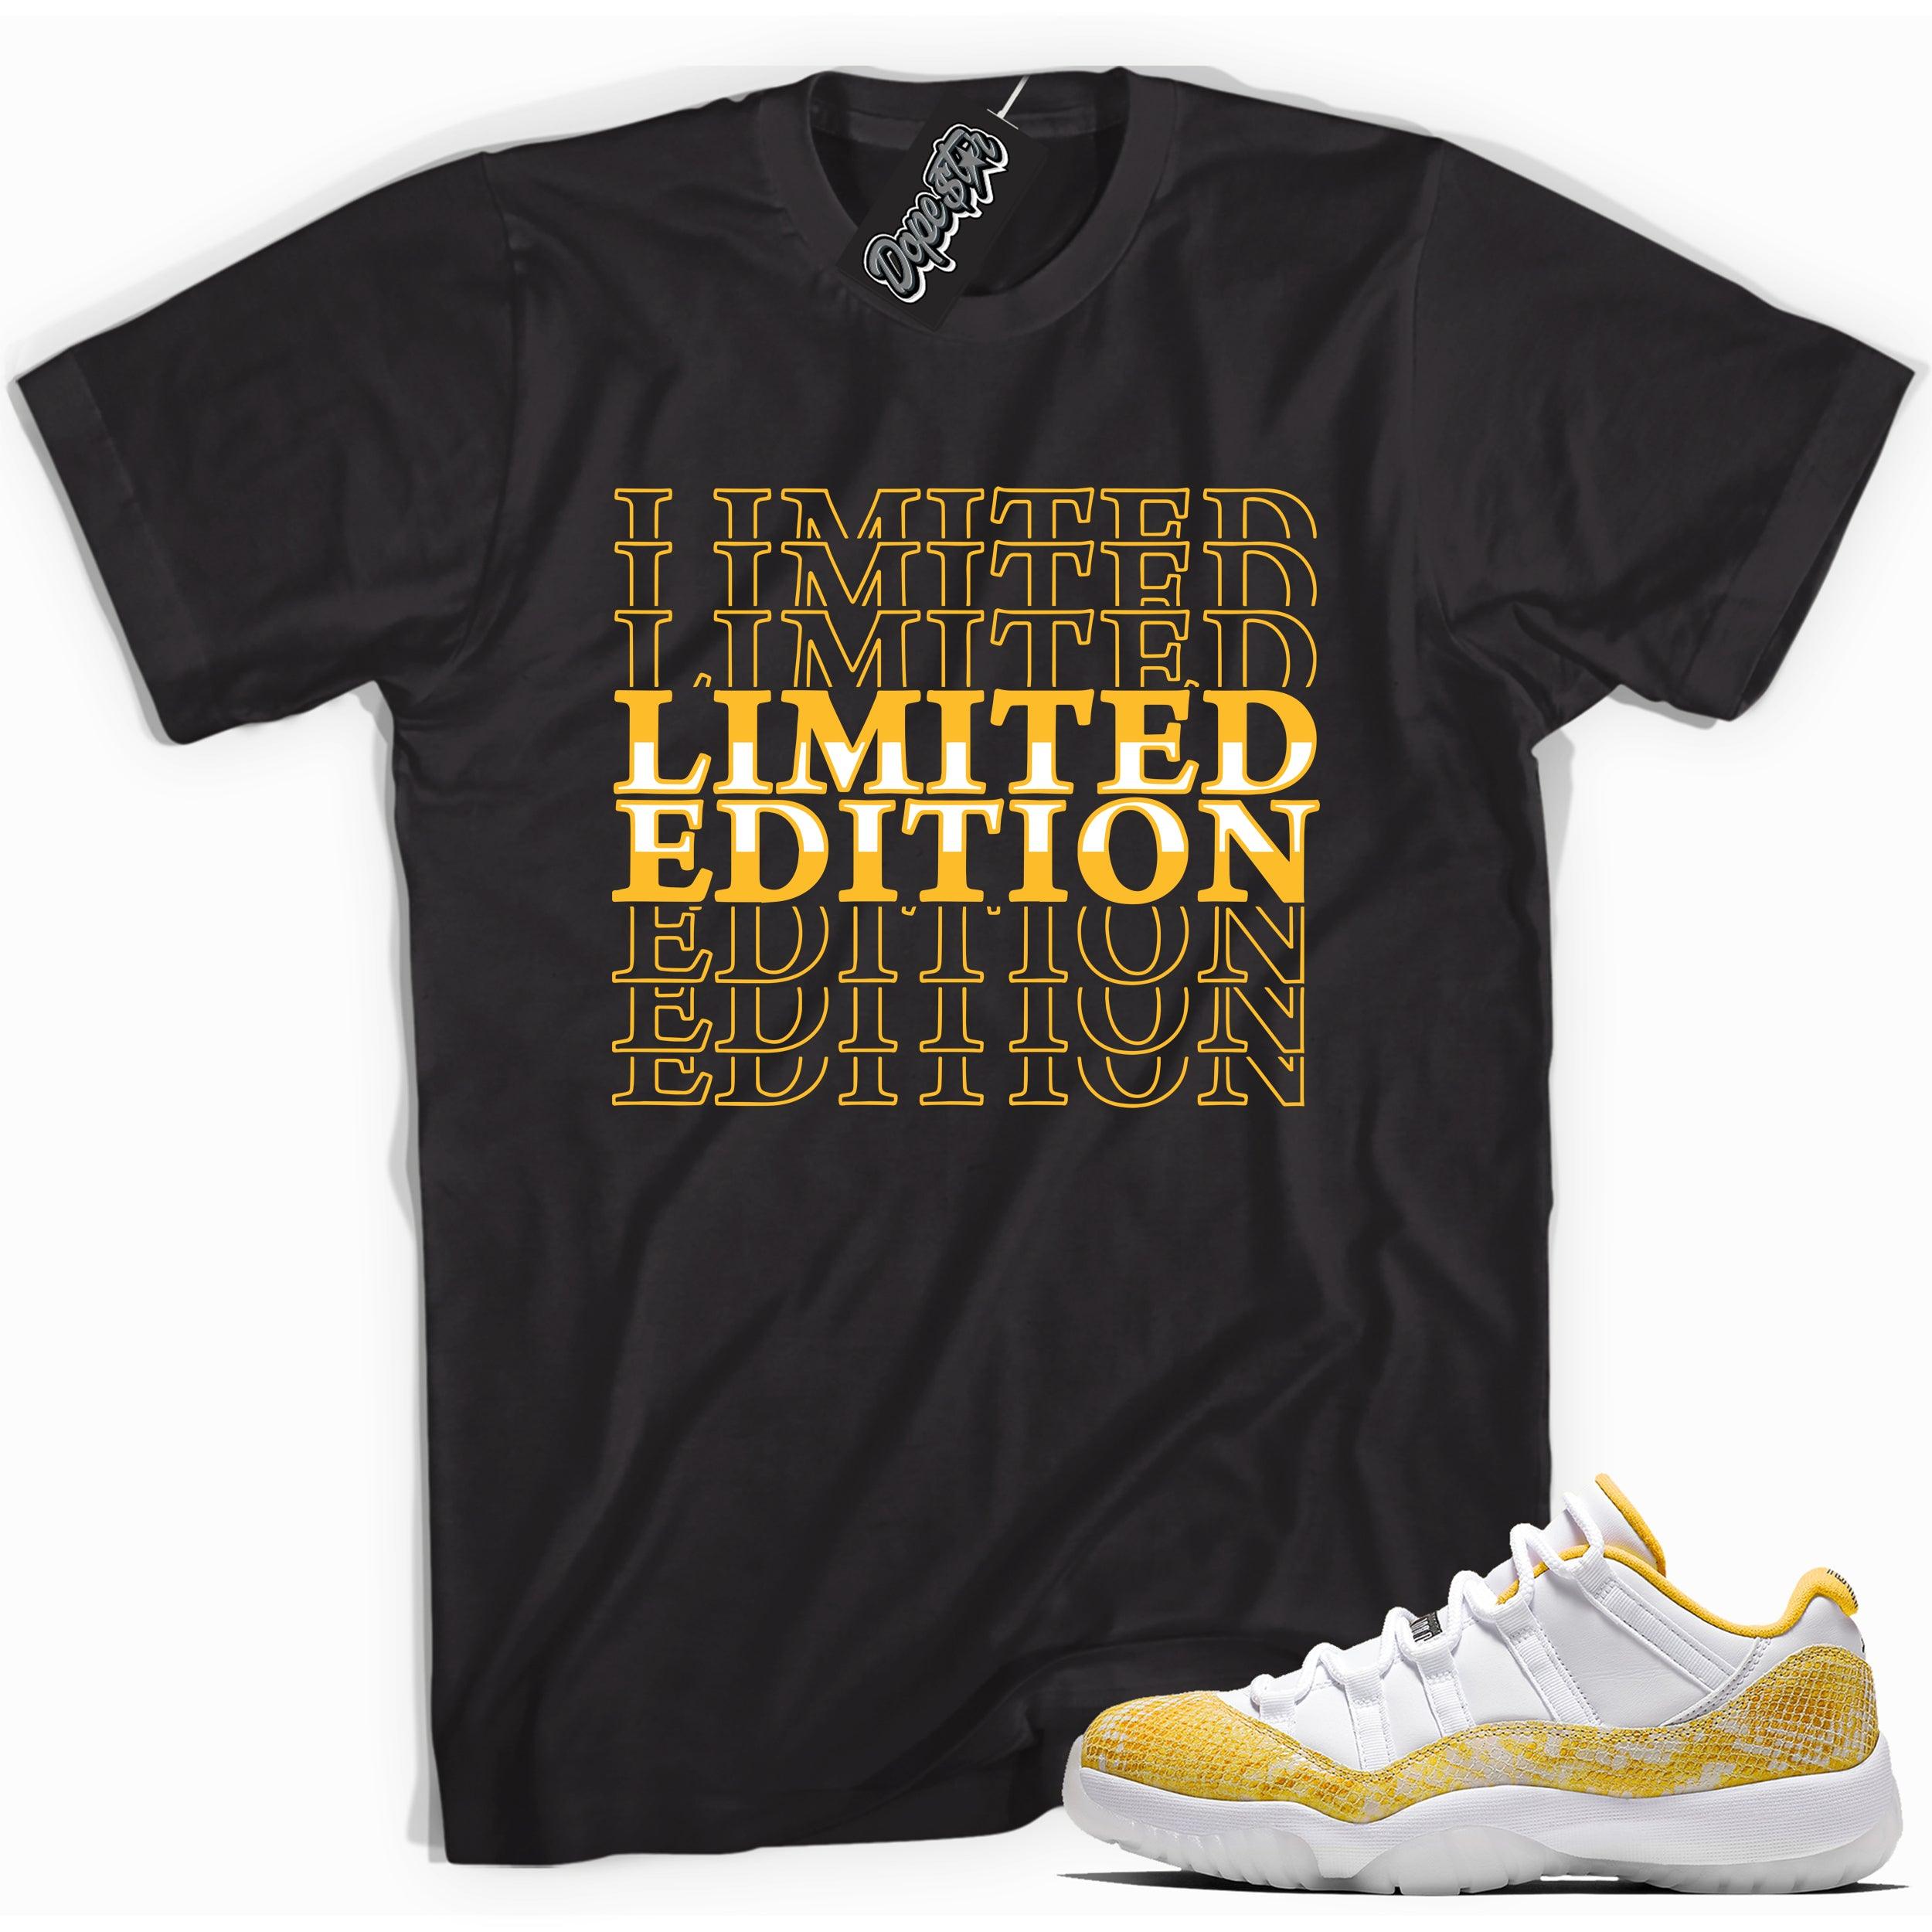 Cool black graphic tee with 'limited edition' print, that perfectly matches  Air Jordan 11 Retro Low Yellow Snakeskin sneakers